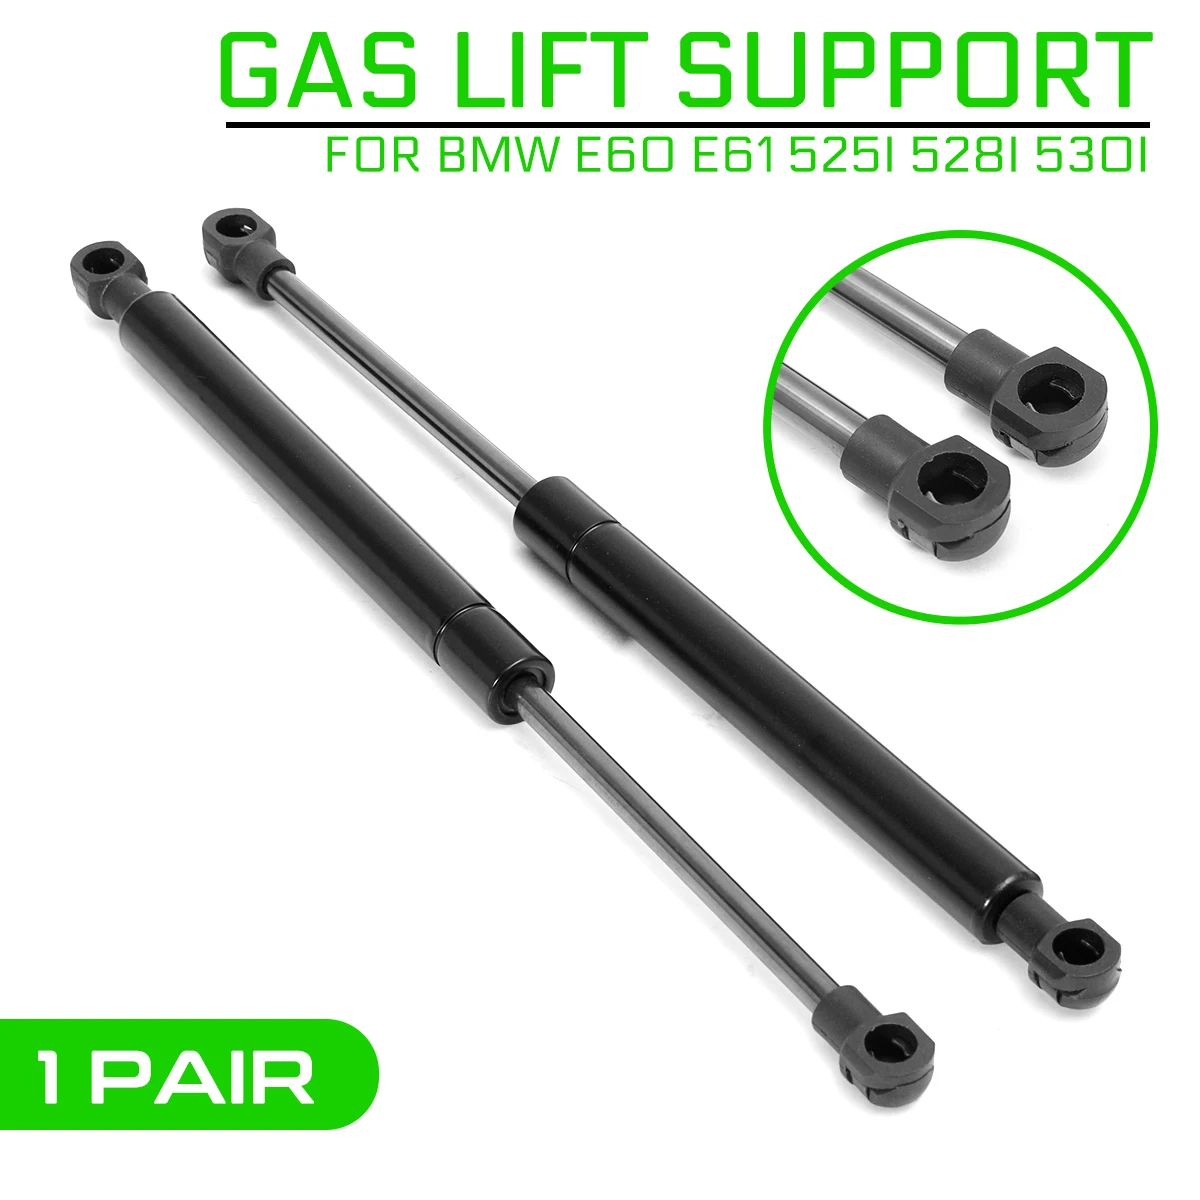 

2pcs Car Support Rod Front Hood Gas Lift Support for BMW E60 E61 525i 528i 530i Shock Strut Damper Car Accessories Replacement